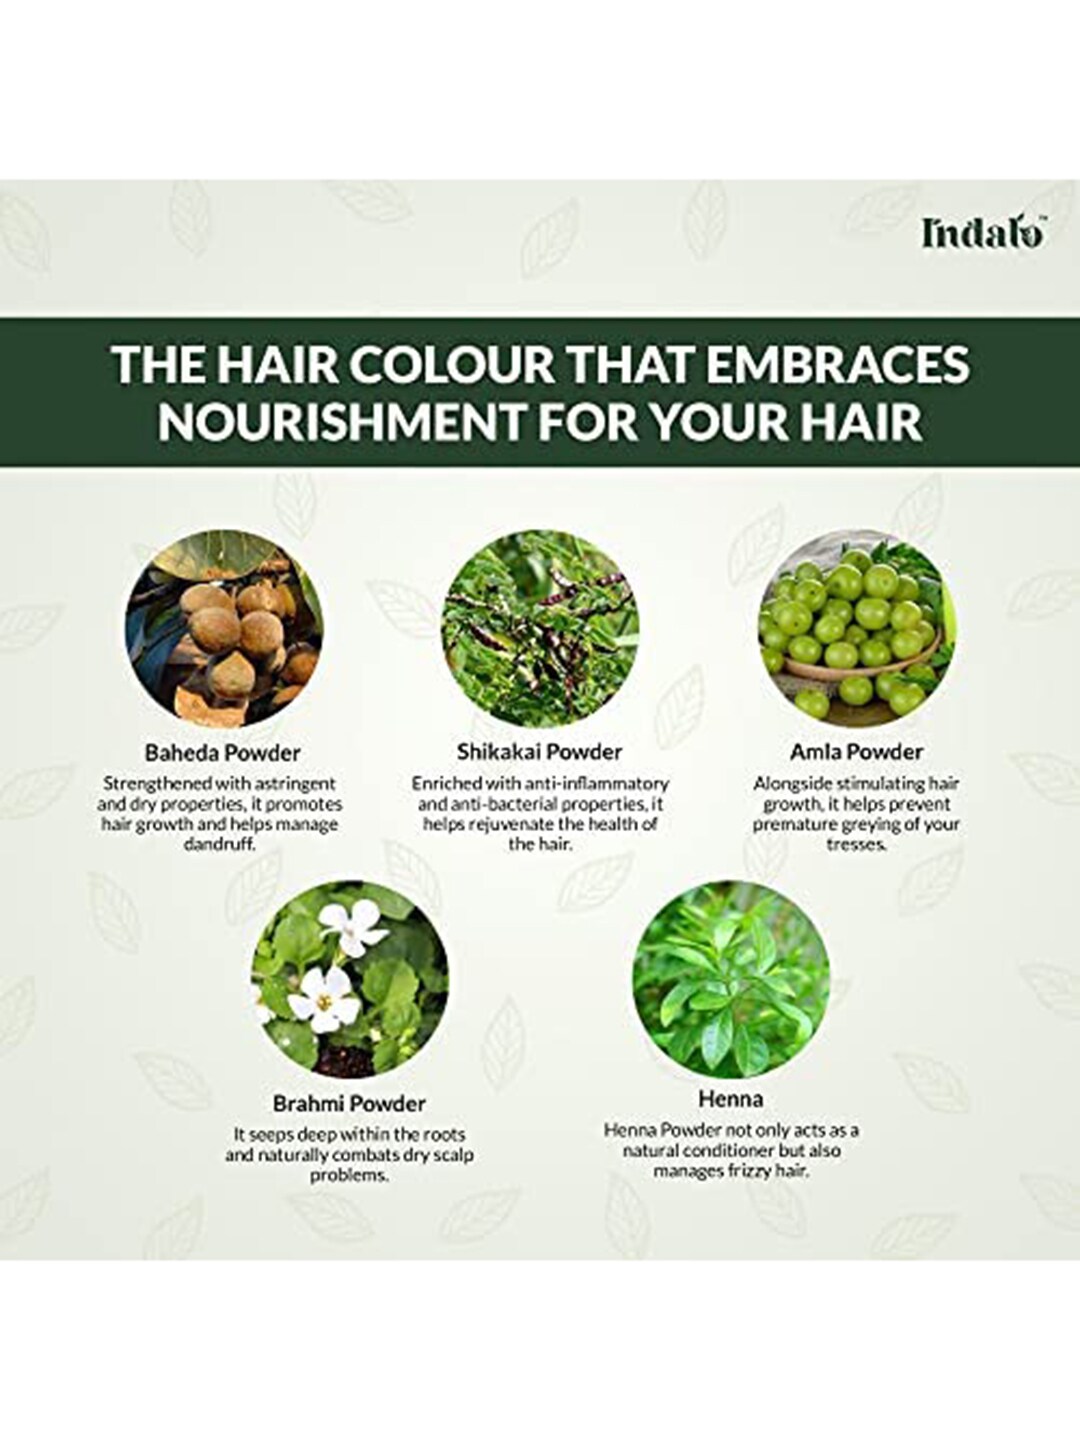 INDALO Set of 2 Herbal Based Hair Colour with Amla & Brahmi 100g Each - Light Brown Price in India